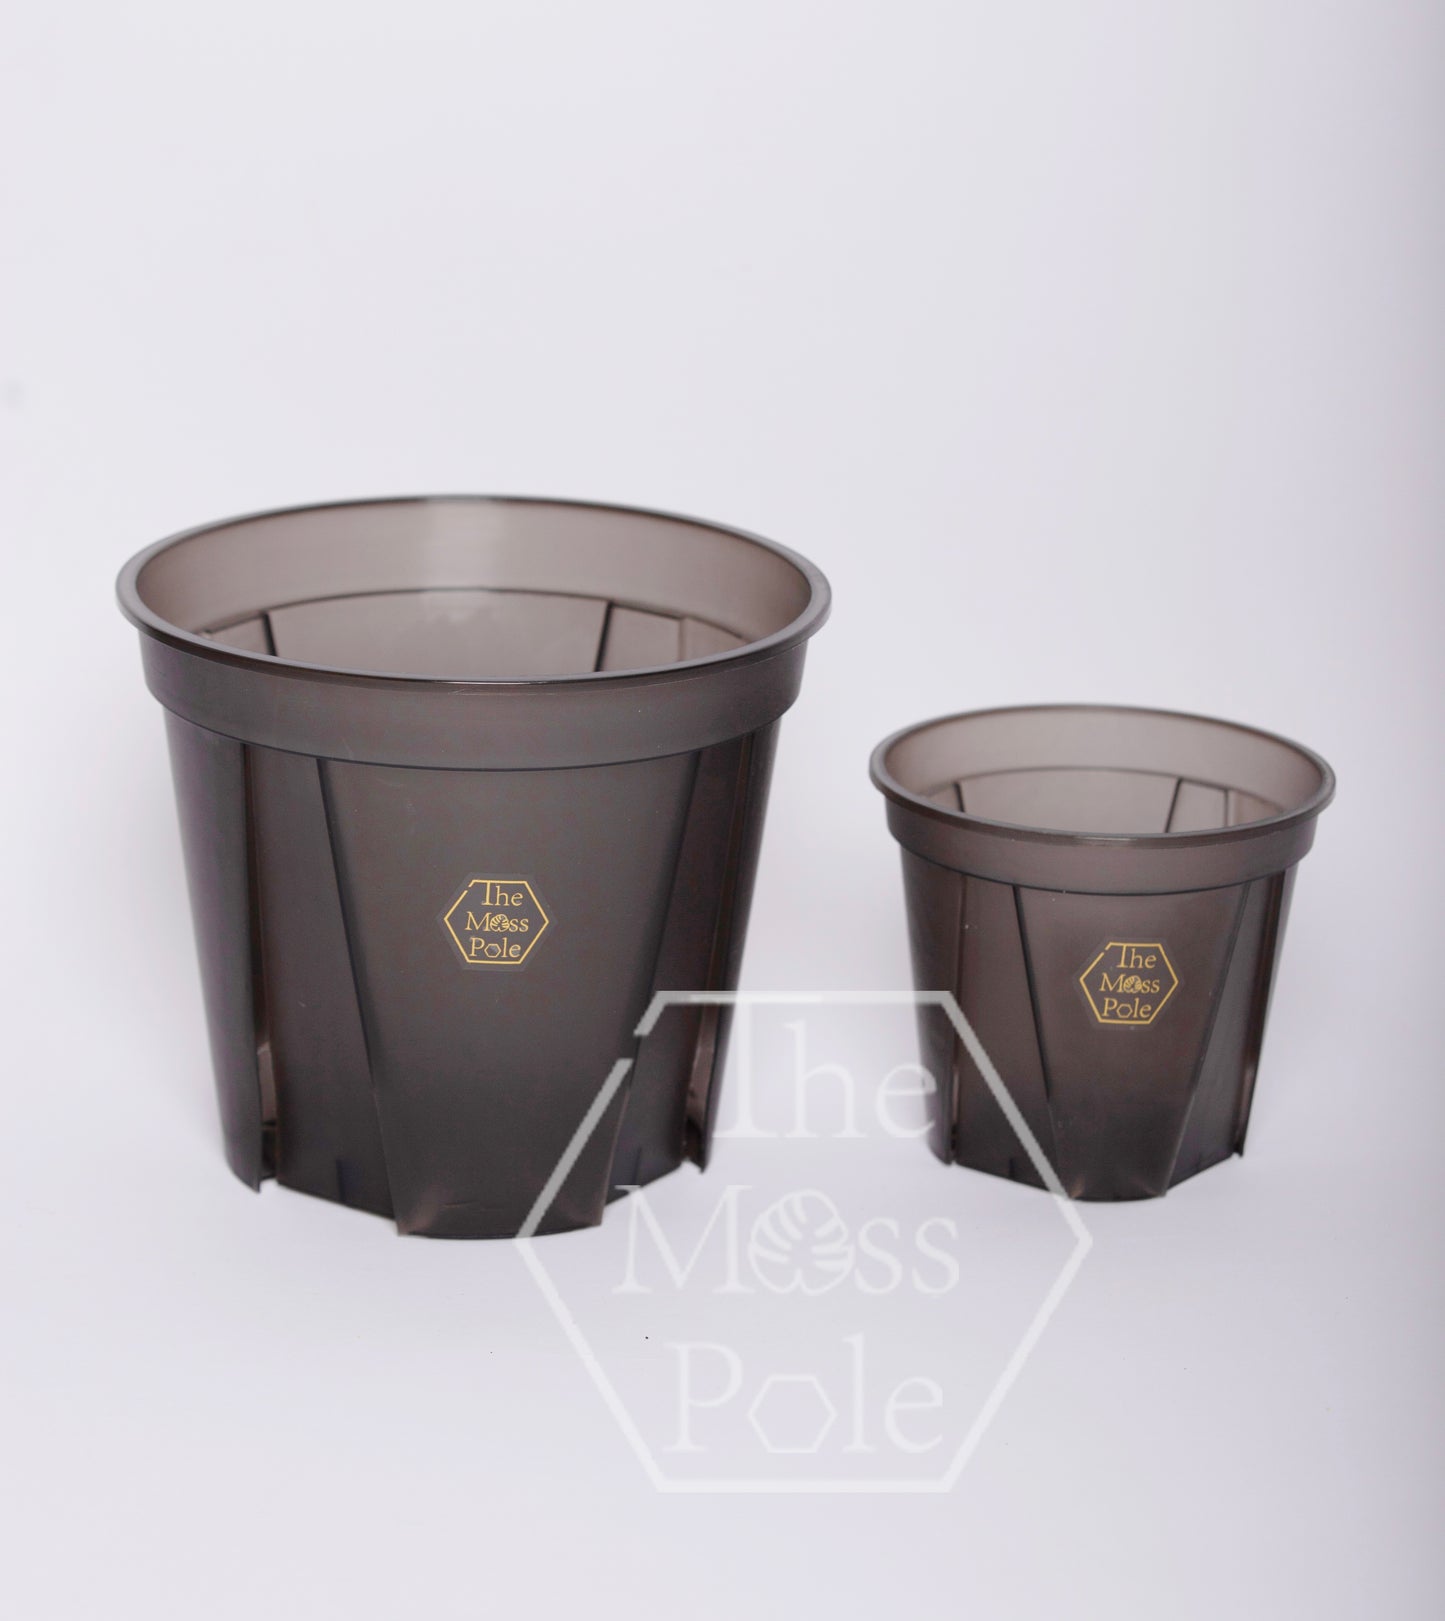 High quality black clear pot with good drainage! 5 inch clear pot 6 inch 7 inch clear pot